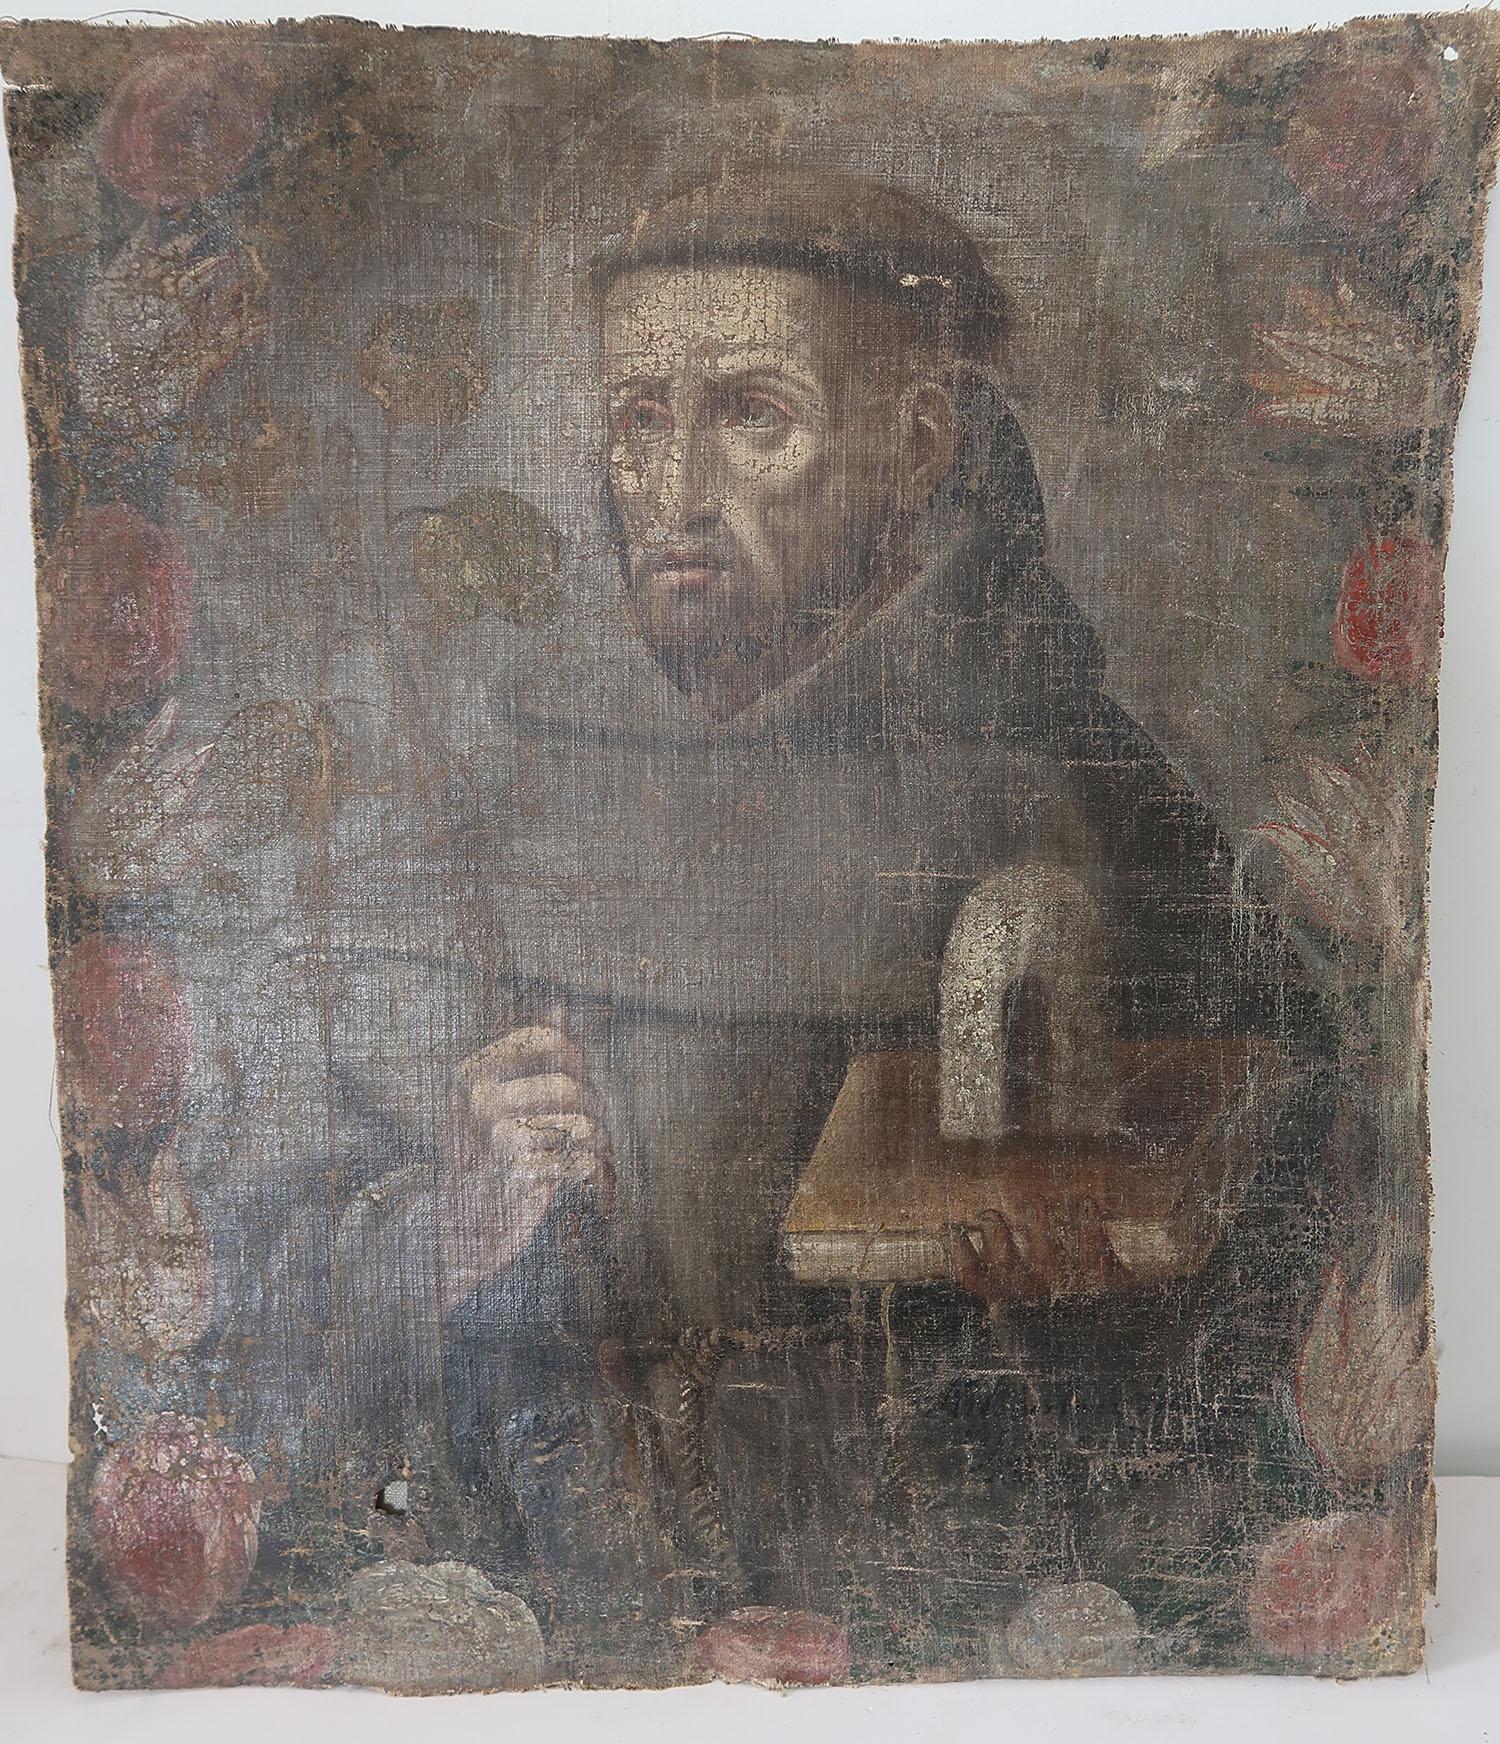 Wonderful naive oil painting of a monk

Great muted colors in unrestored condition

Oil on canvas. No stretcher. There is another religious painting on the verso

Unsigned. Artist unknown

I am suggesting the painting is 17th Century going